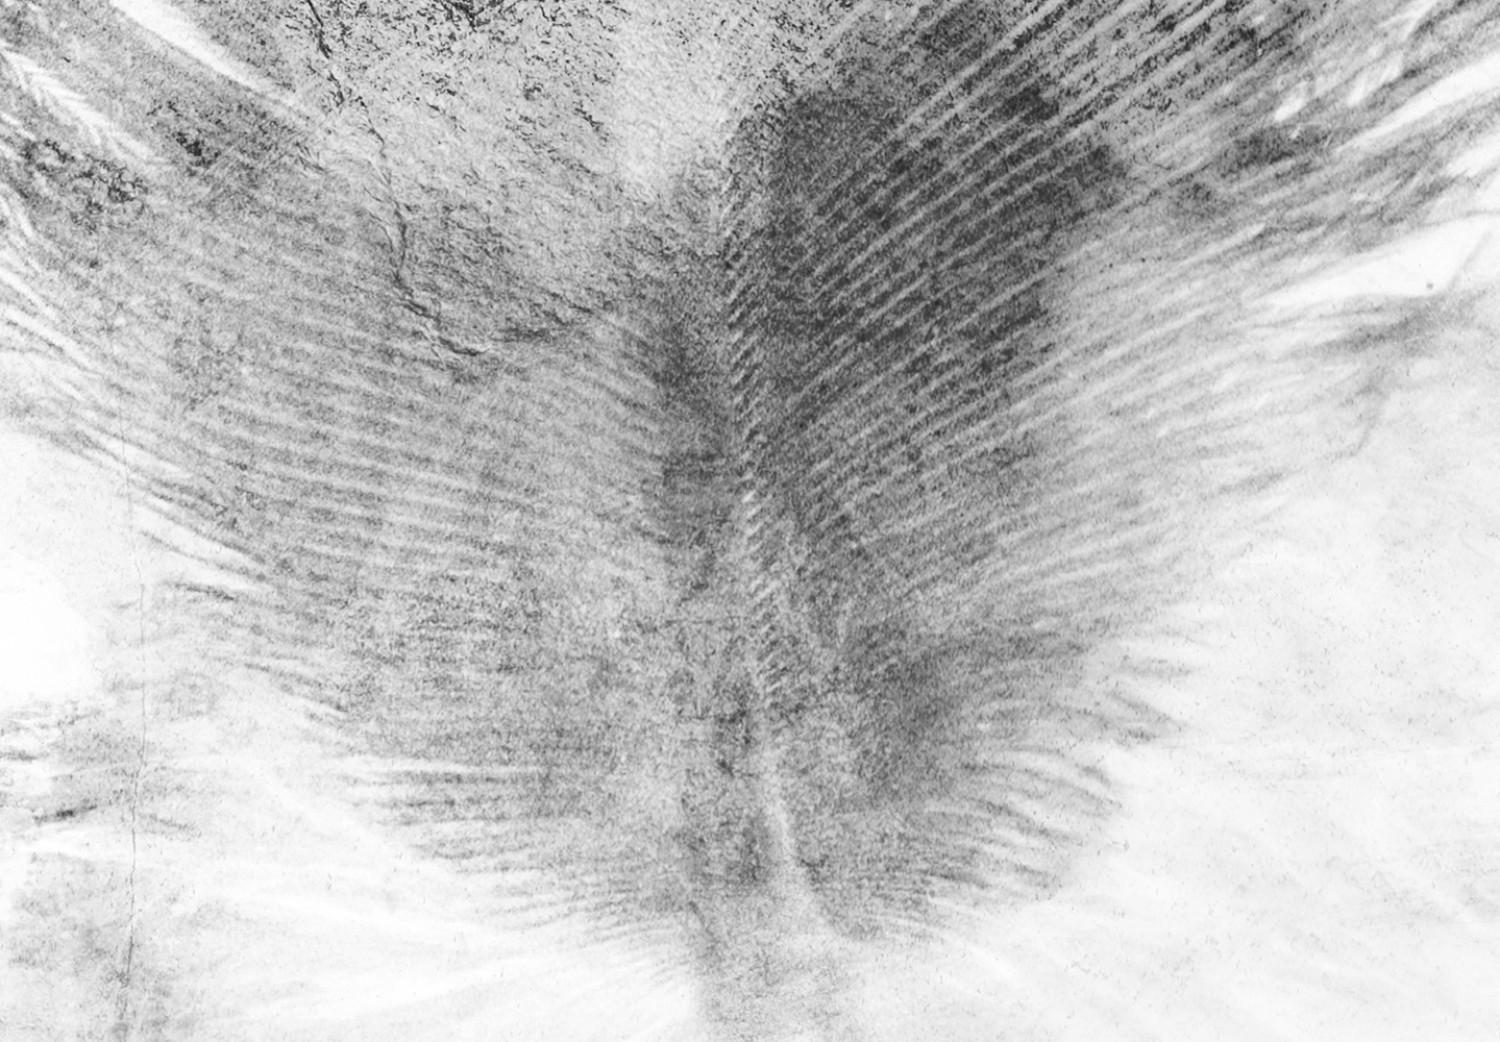 Gallery wall Fleeting - black sketch of a bird feather on contrasting white background